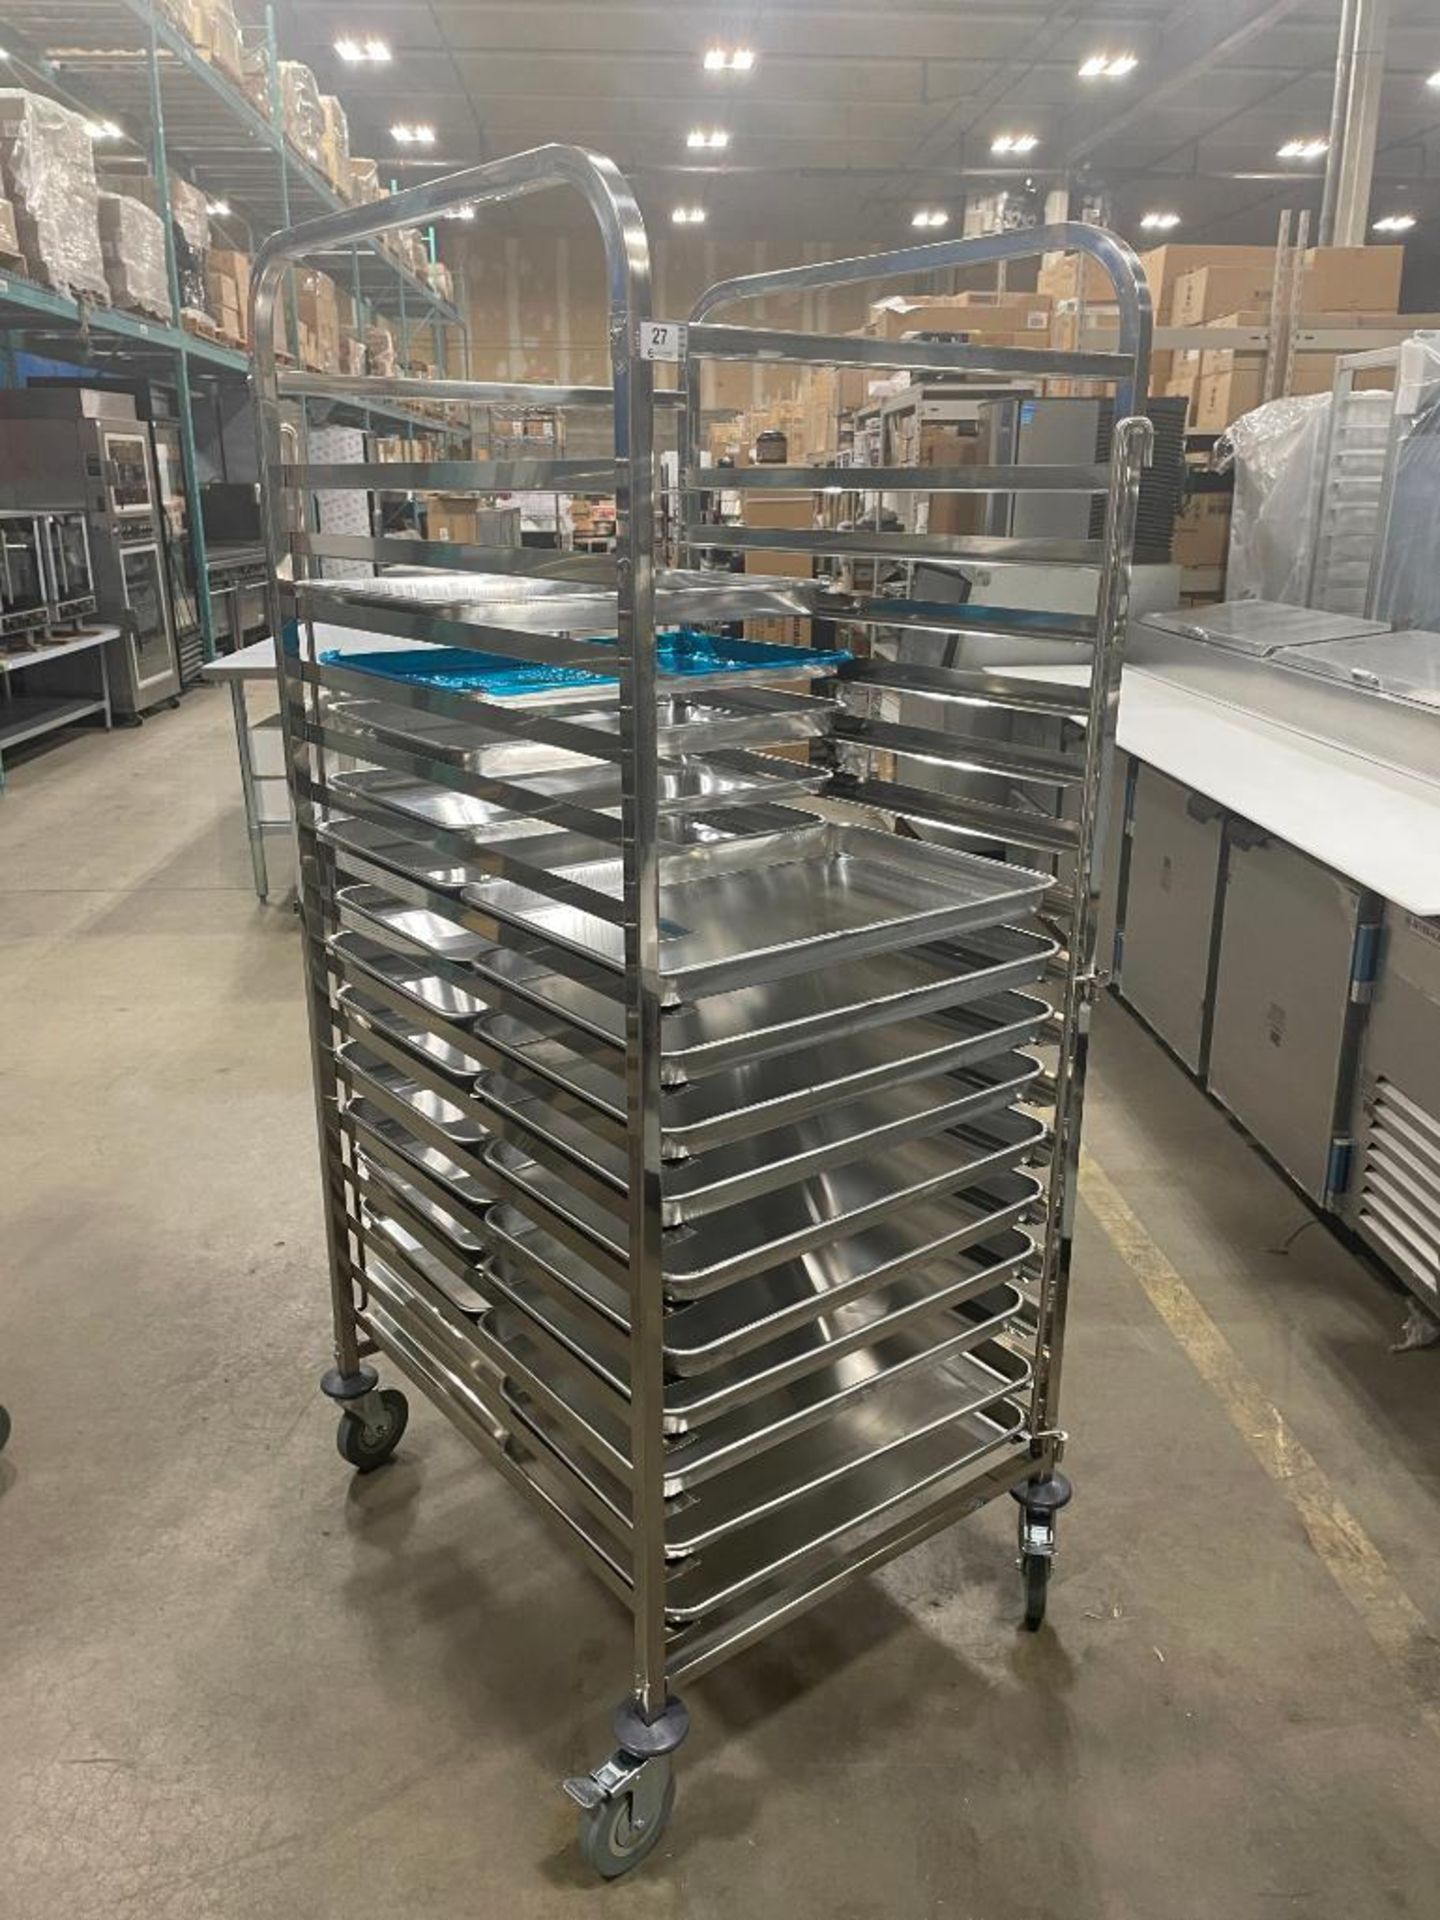 NEW STAINLESS STEEL 16-SLOT OVERSIZED BUN PAN RACK WITH PAN GUARD & (22) PANS - Image 4 of 8